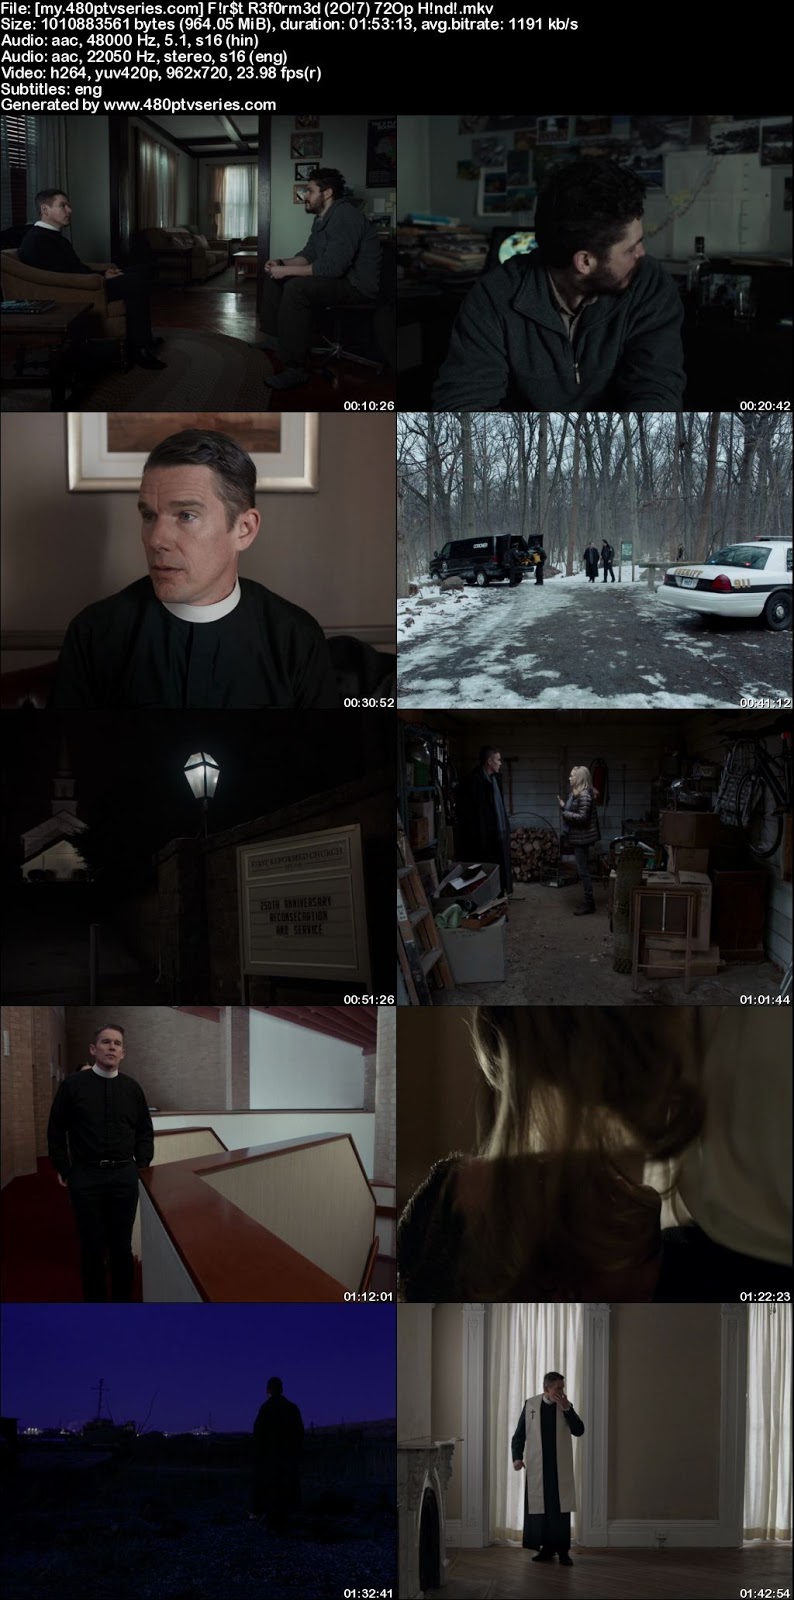 Watch Online Free First Reformed (2017) Full Hindi Dual Audio Movie Download 480p 720p Bluray